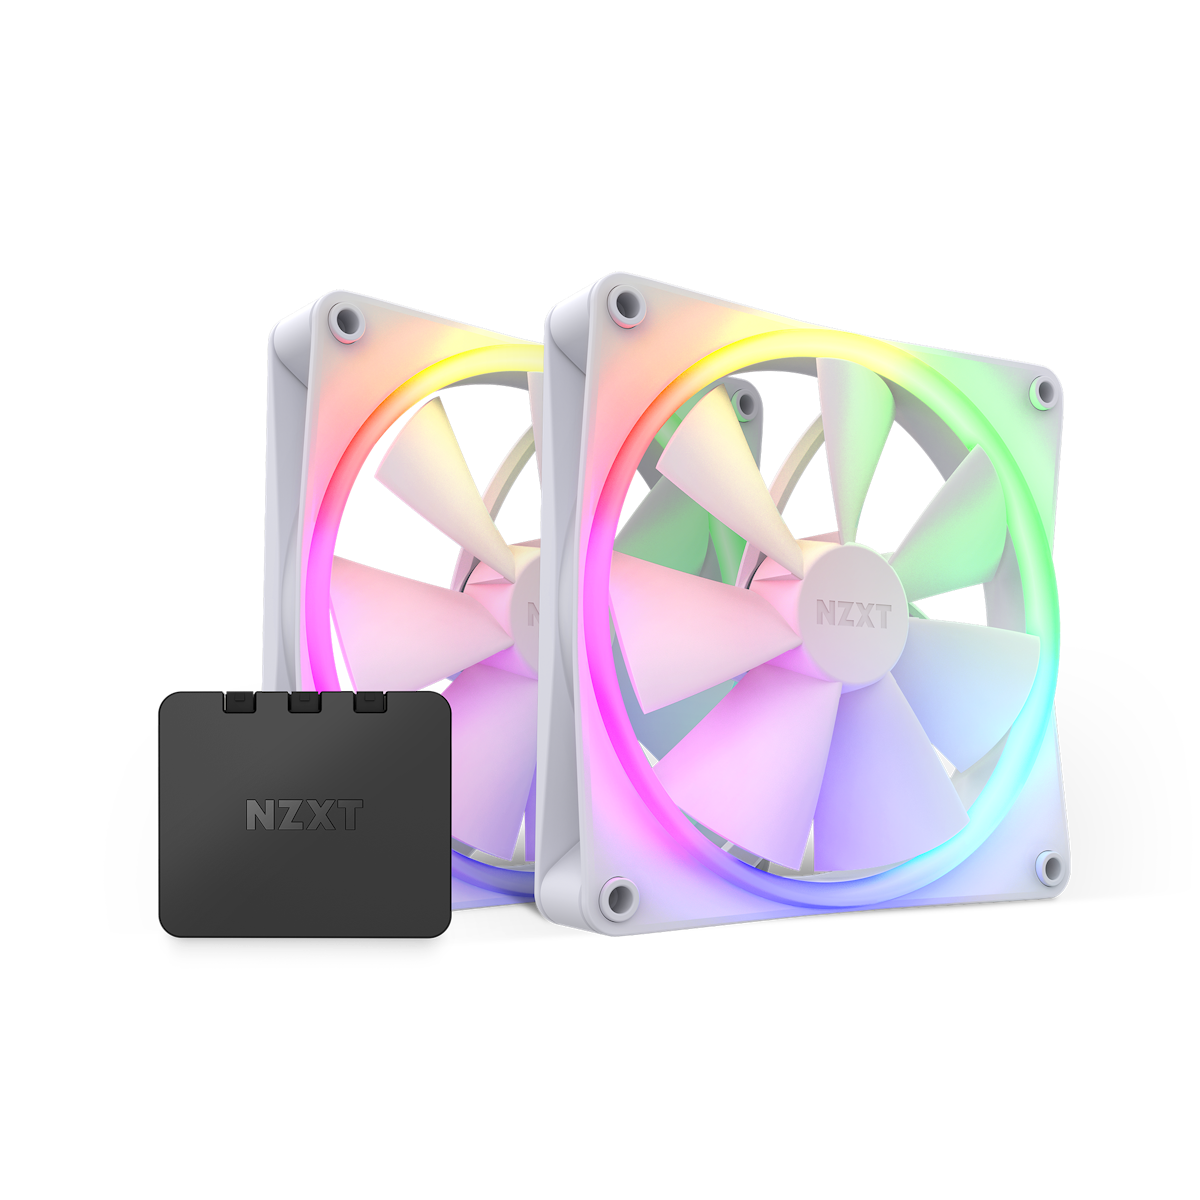 First Look: NZXT F140 RGB Duo Fans